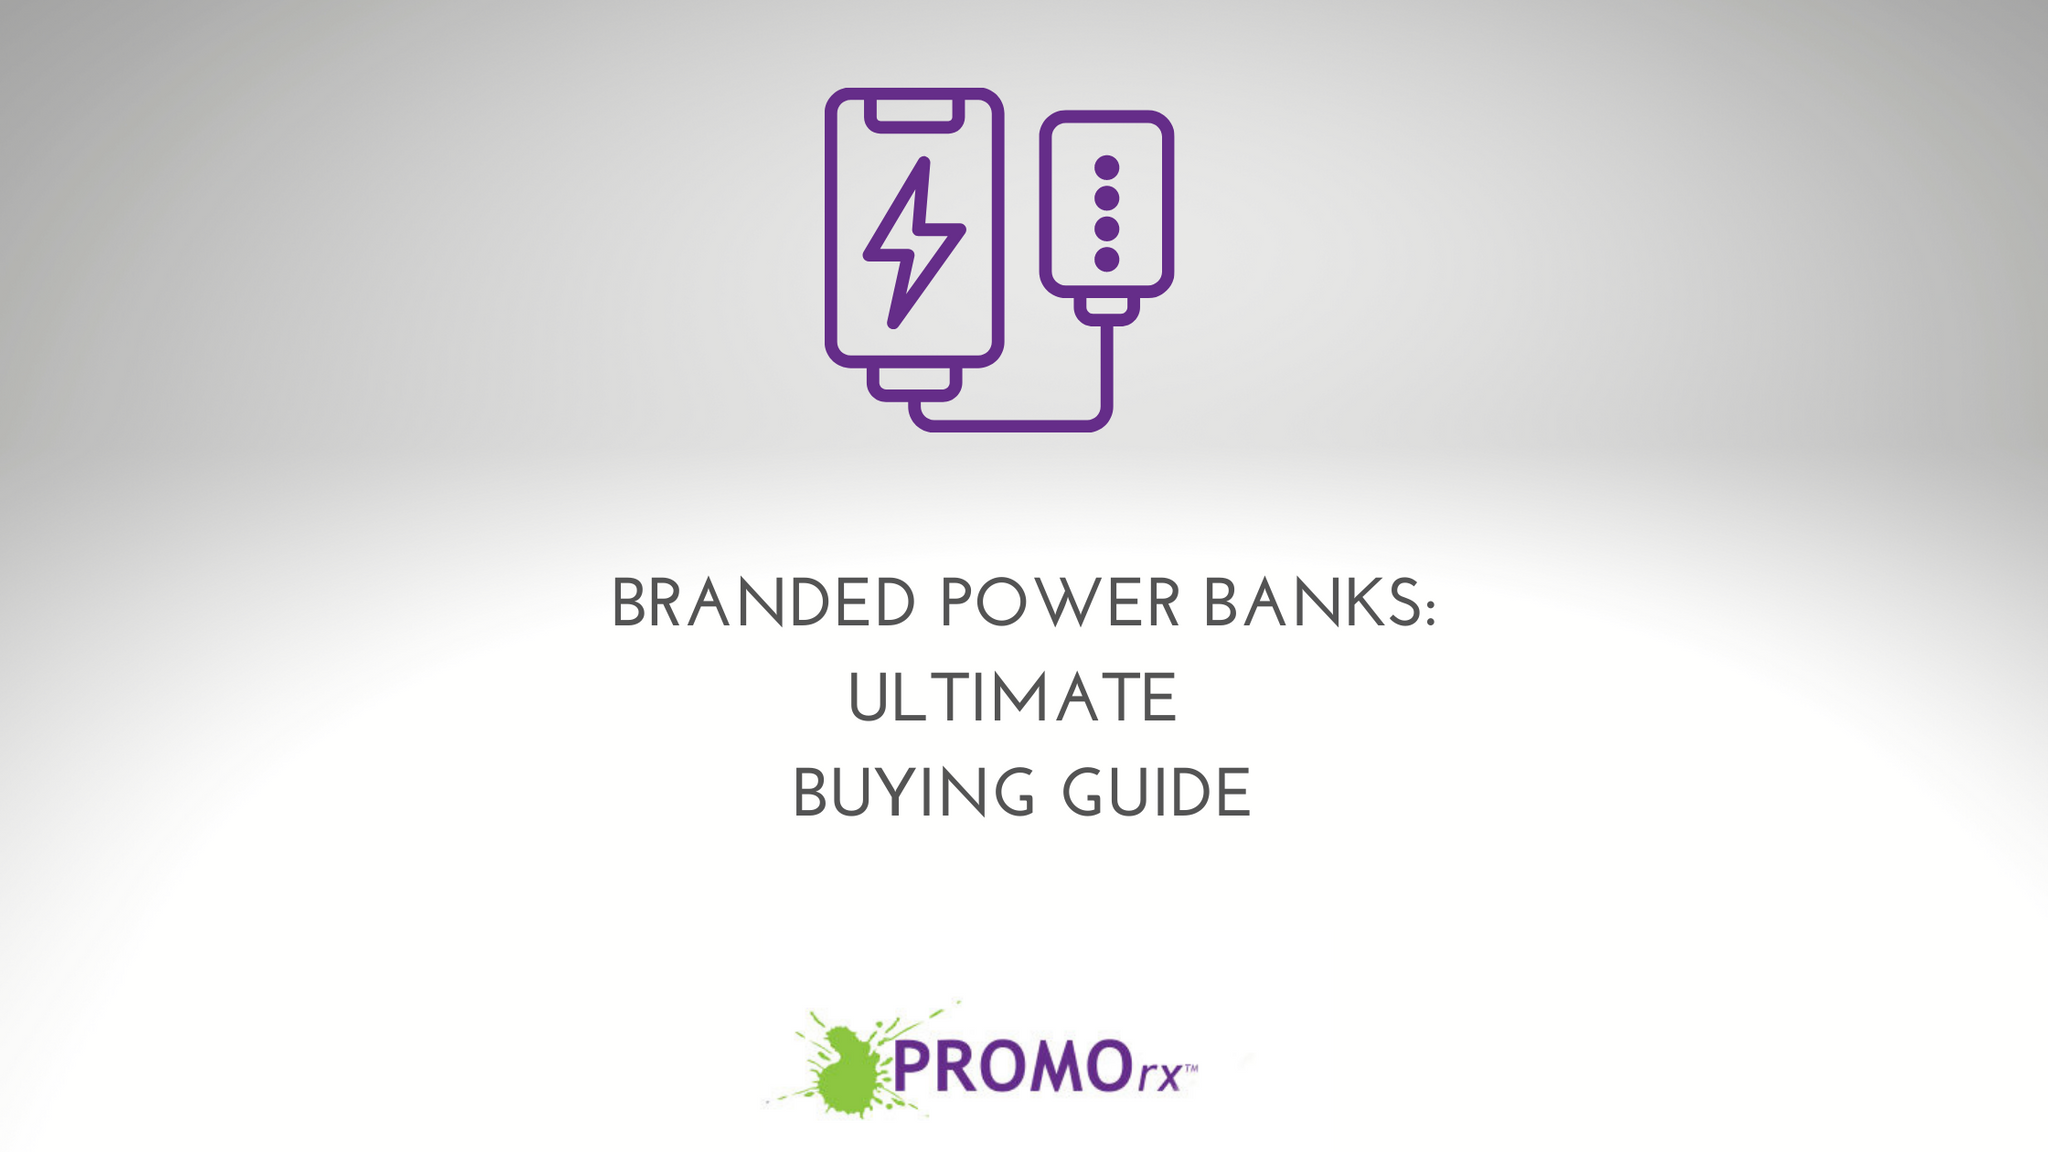 Branded Power Banks: Ultimate Buying Guide